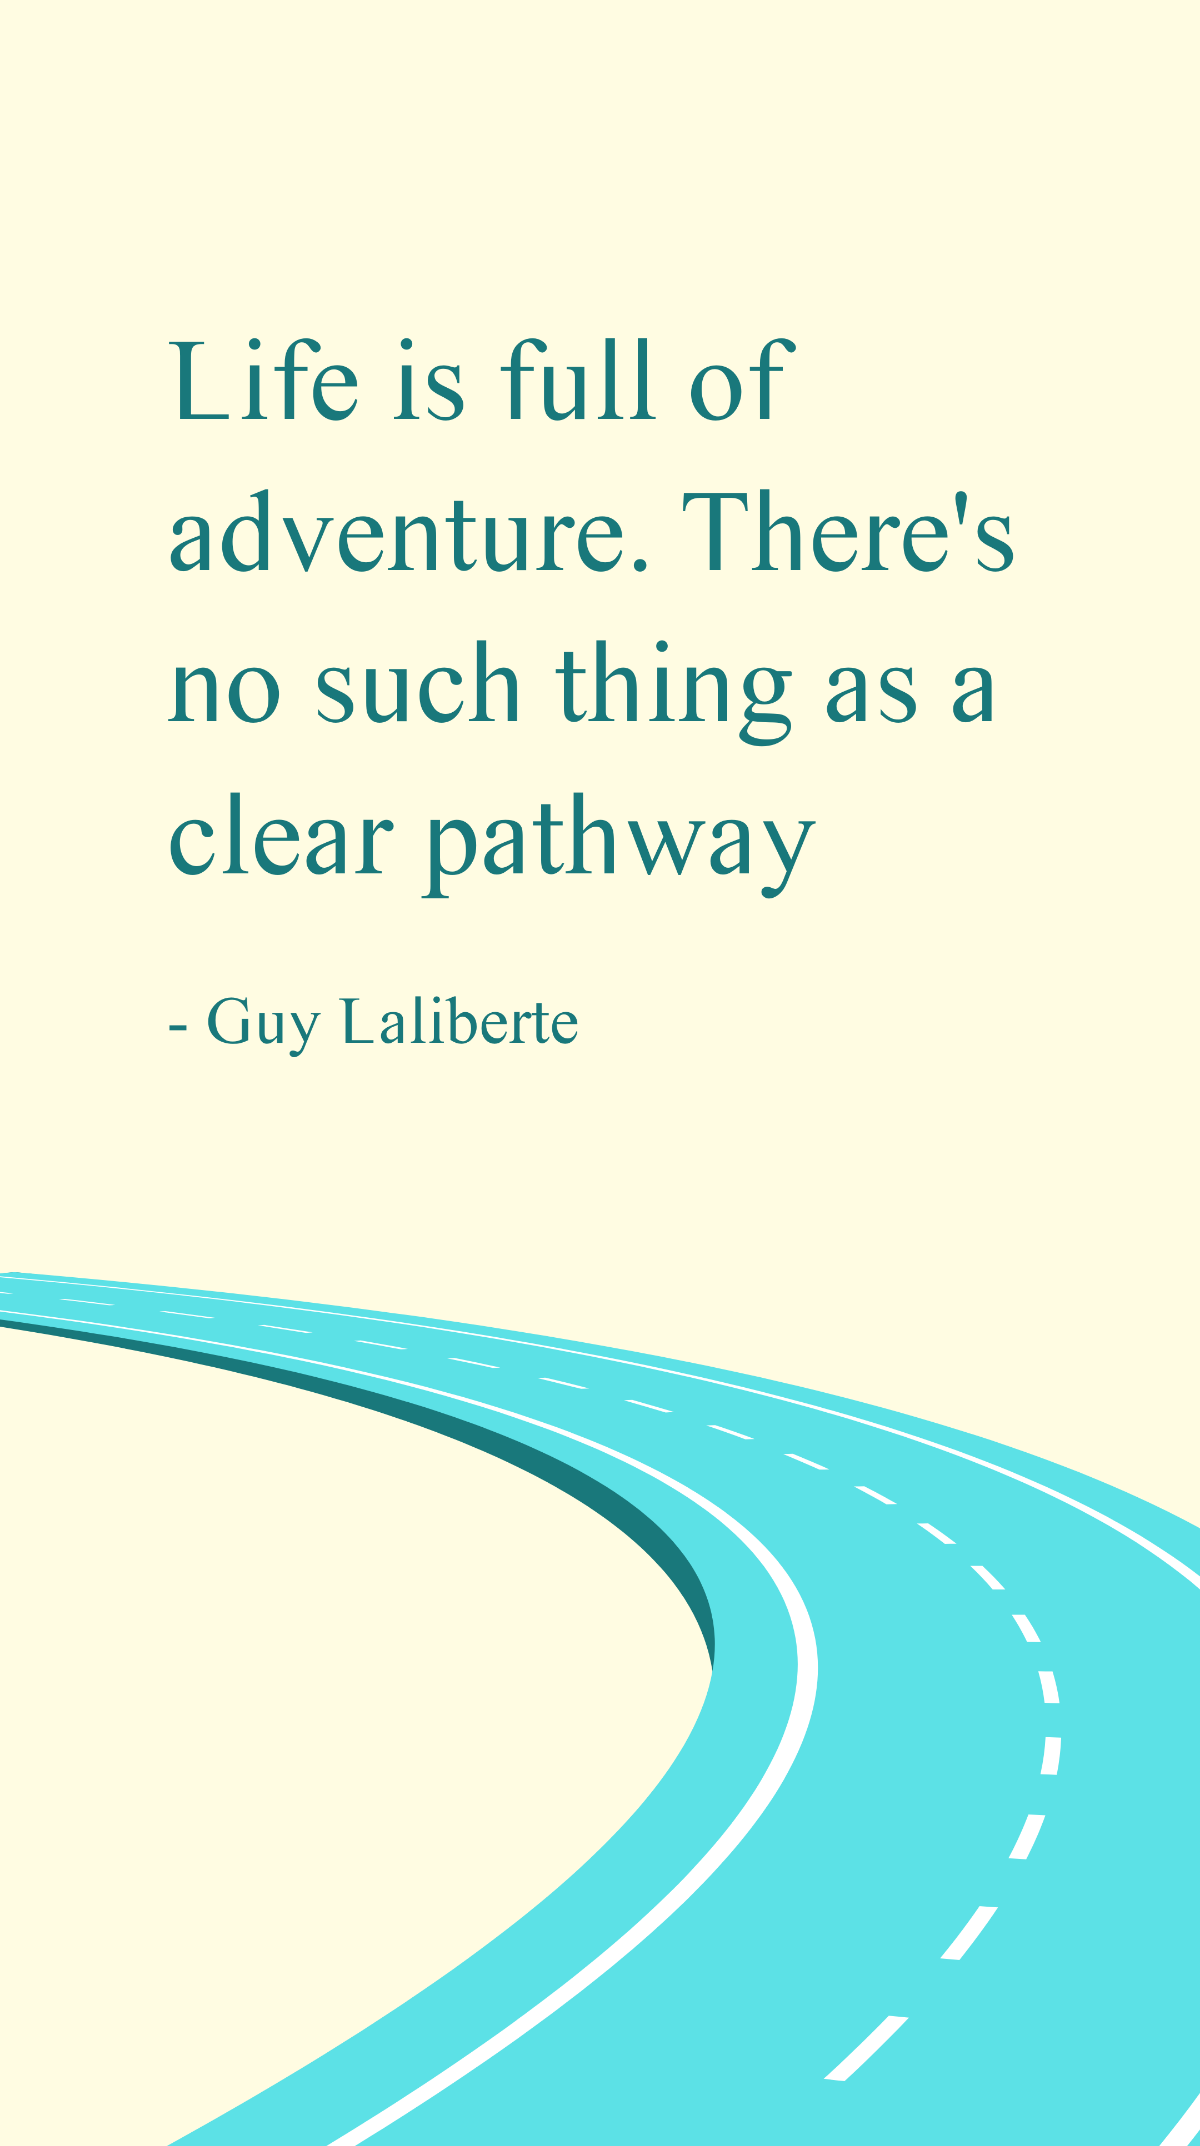 Guy Laliberte - Life is full of adventure. There's no such thing as a clear pathway